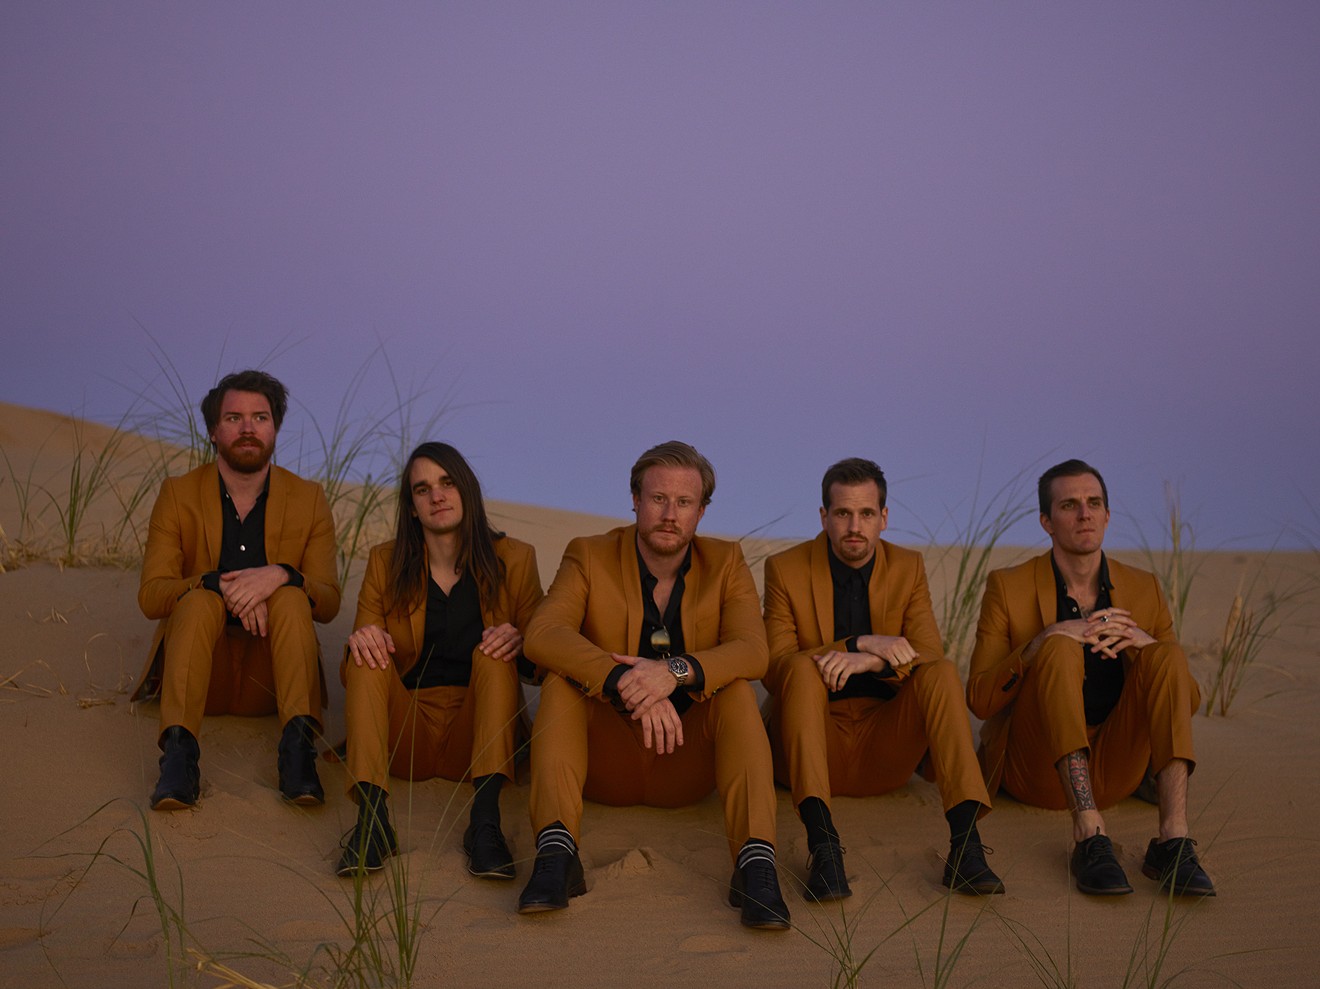 A new album from The Maine comes out this week.